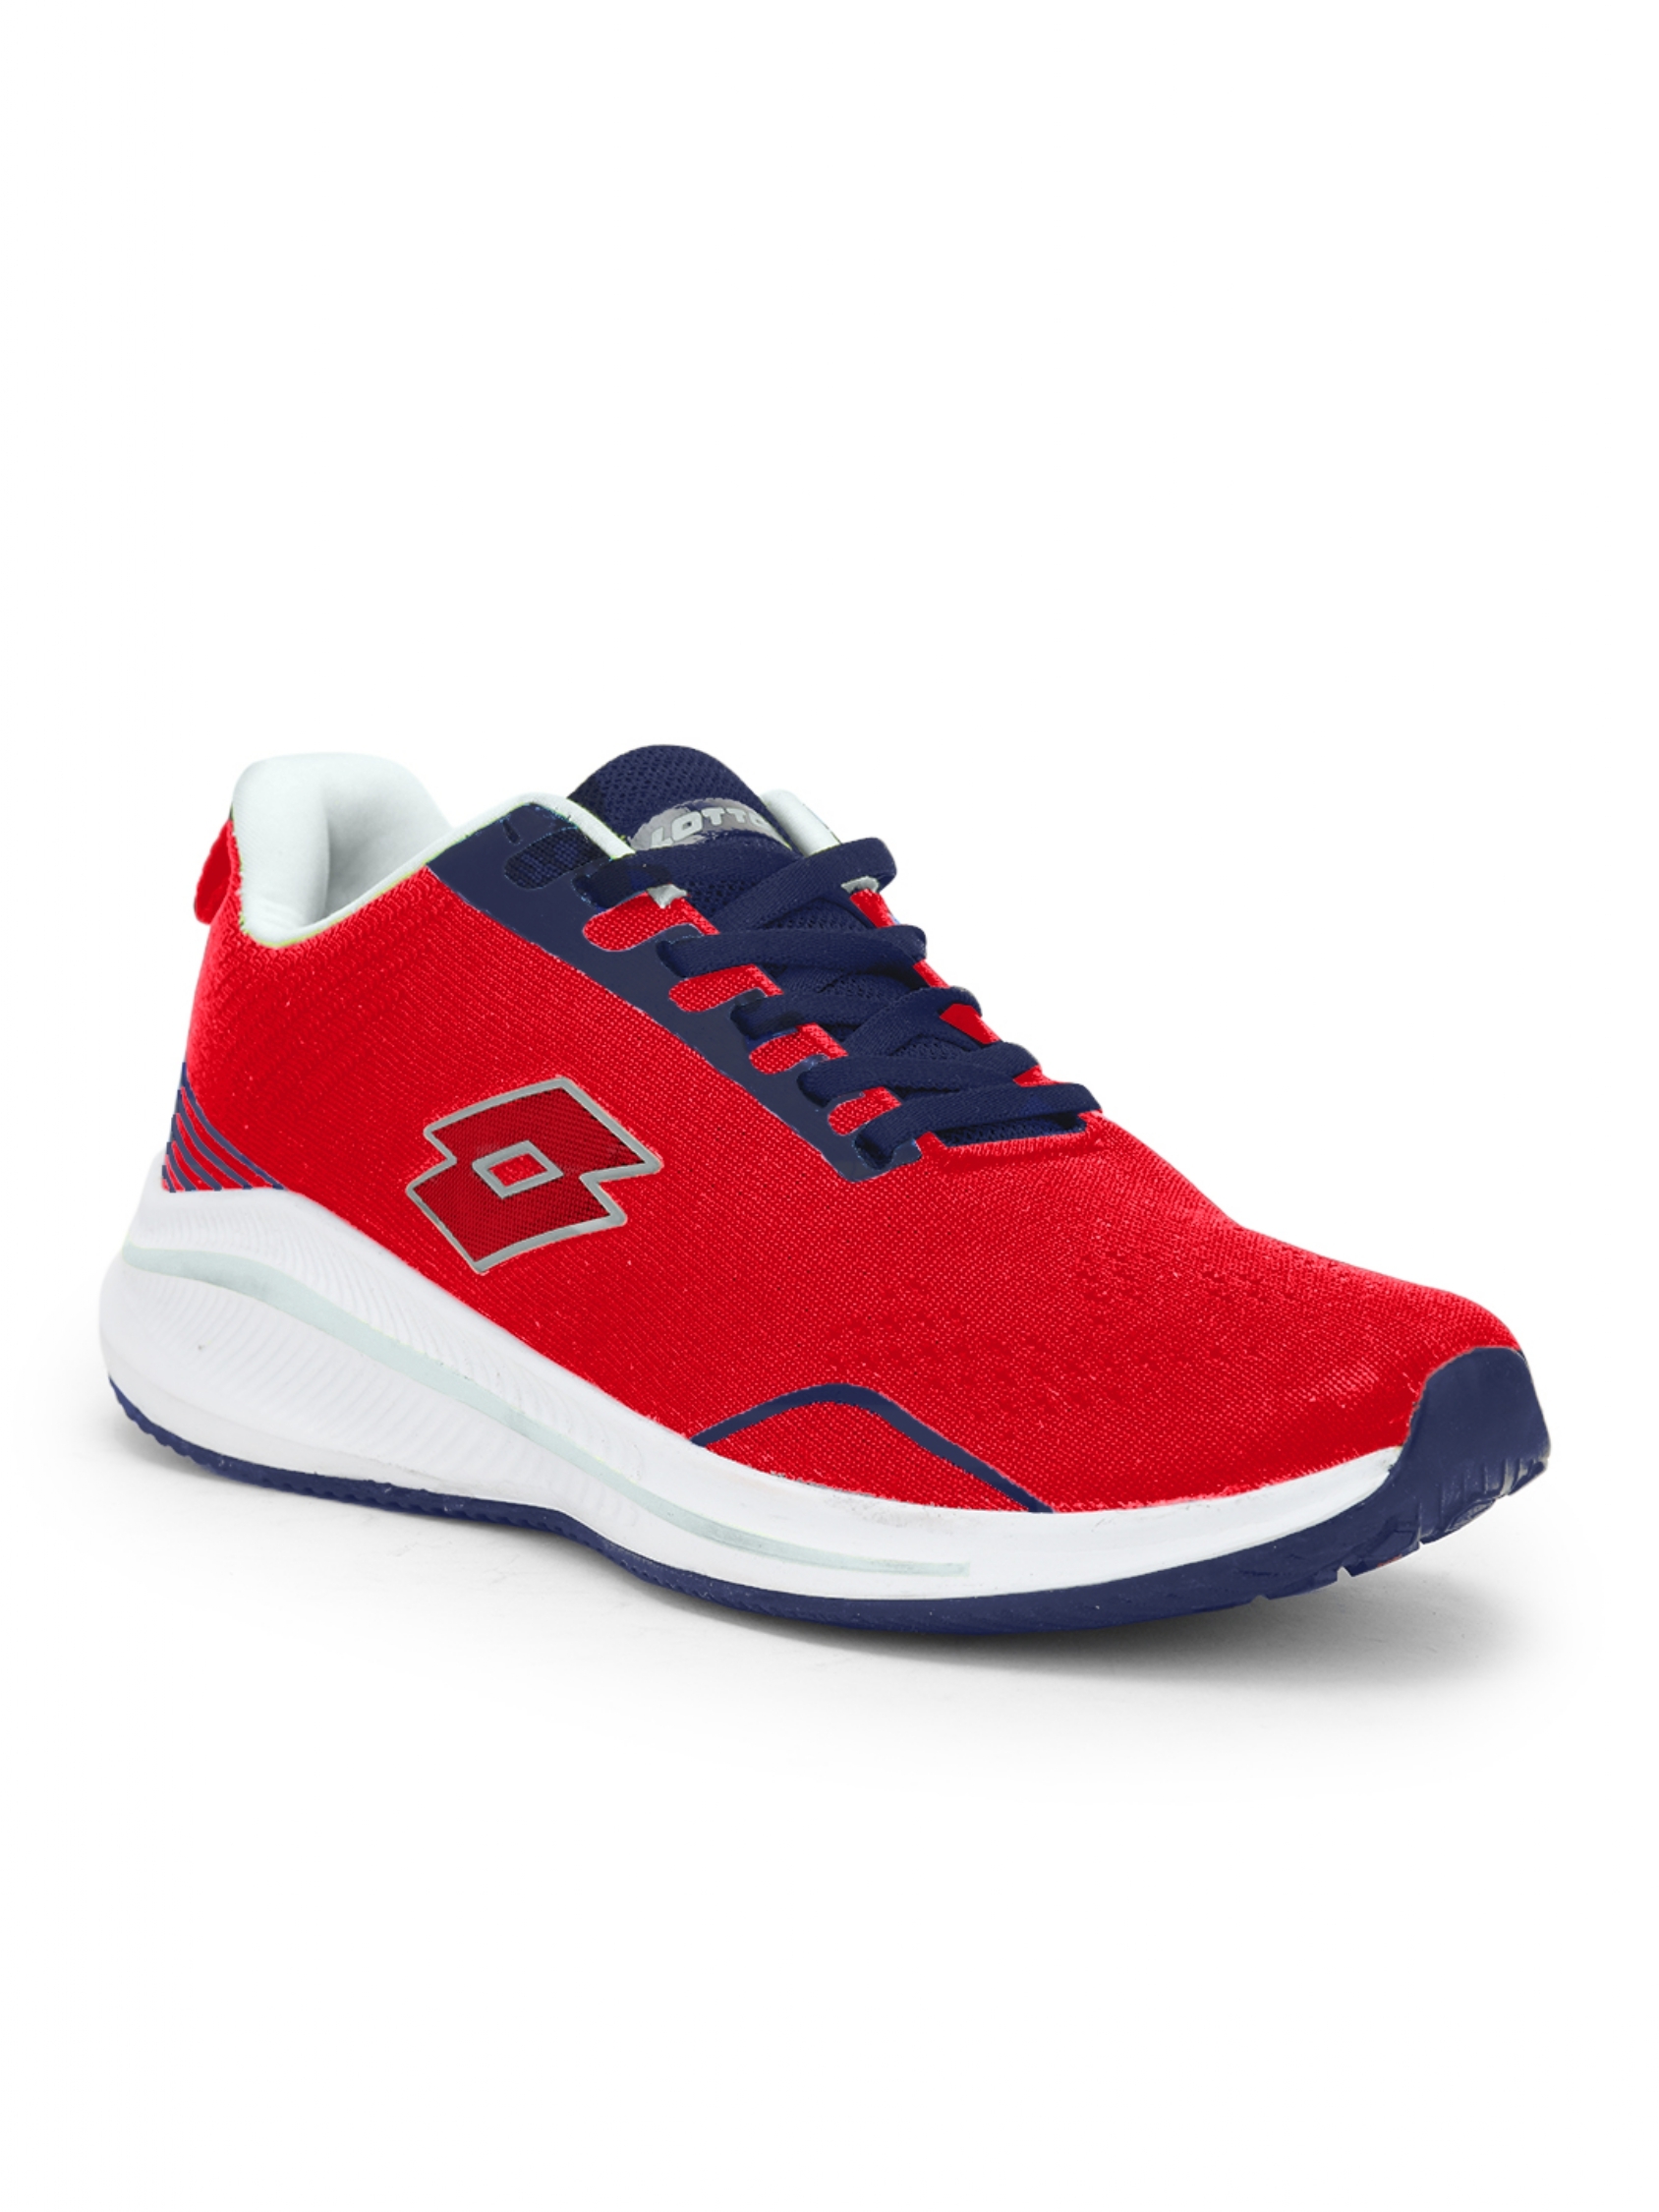 Lotto | LOTTO MEN RED FAUSTA RUNNING SHOES